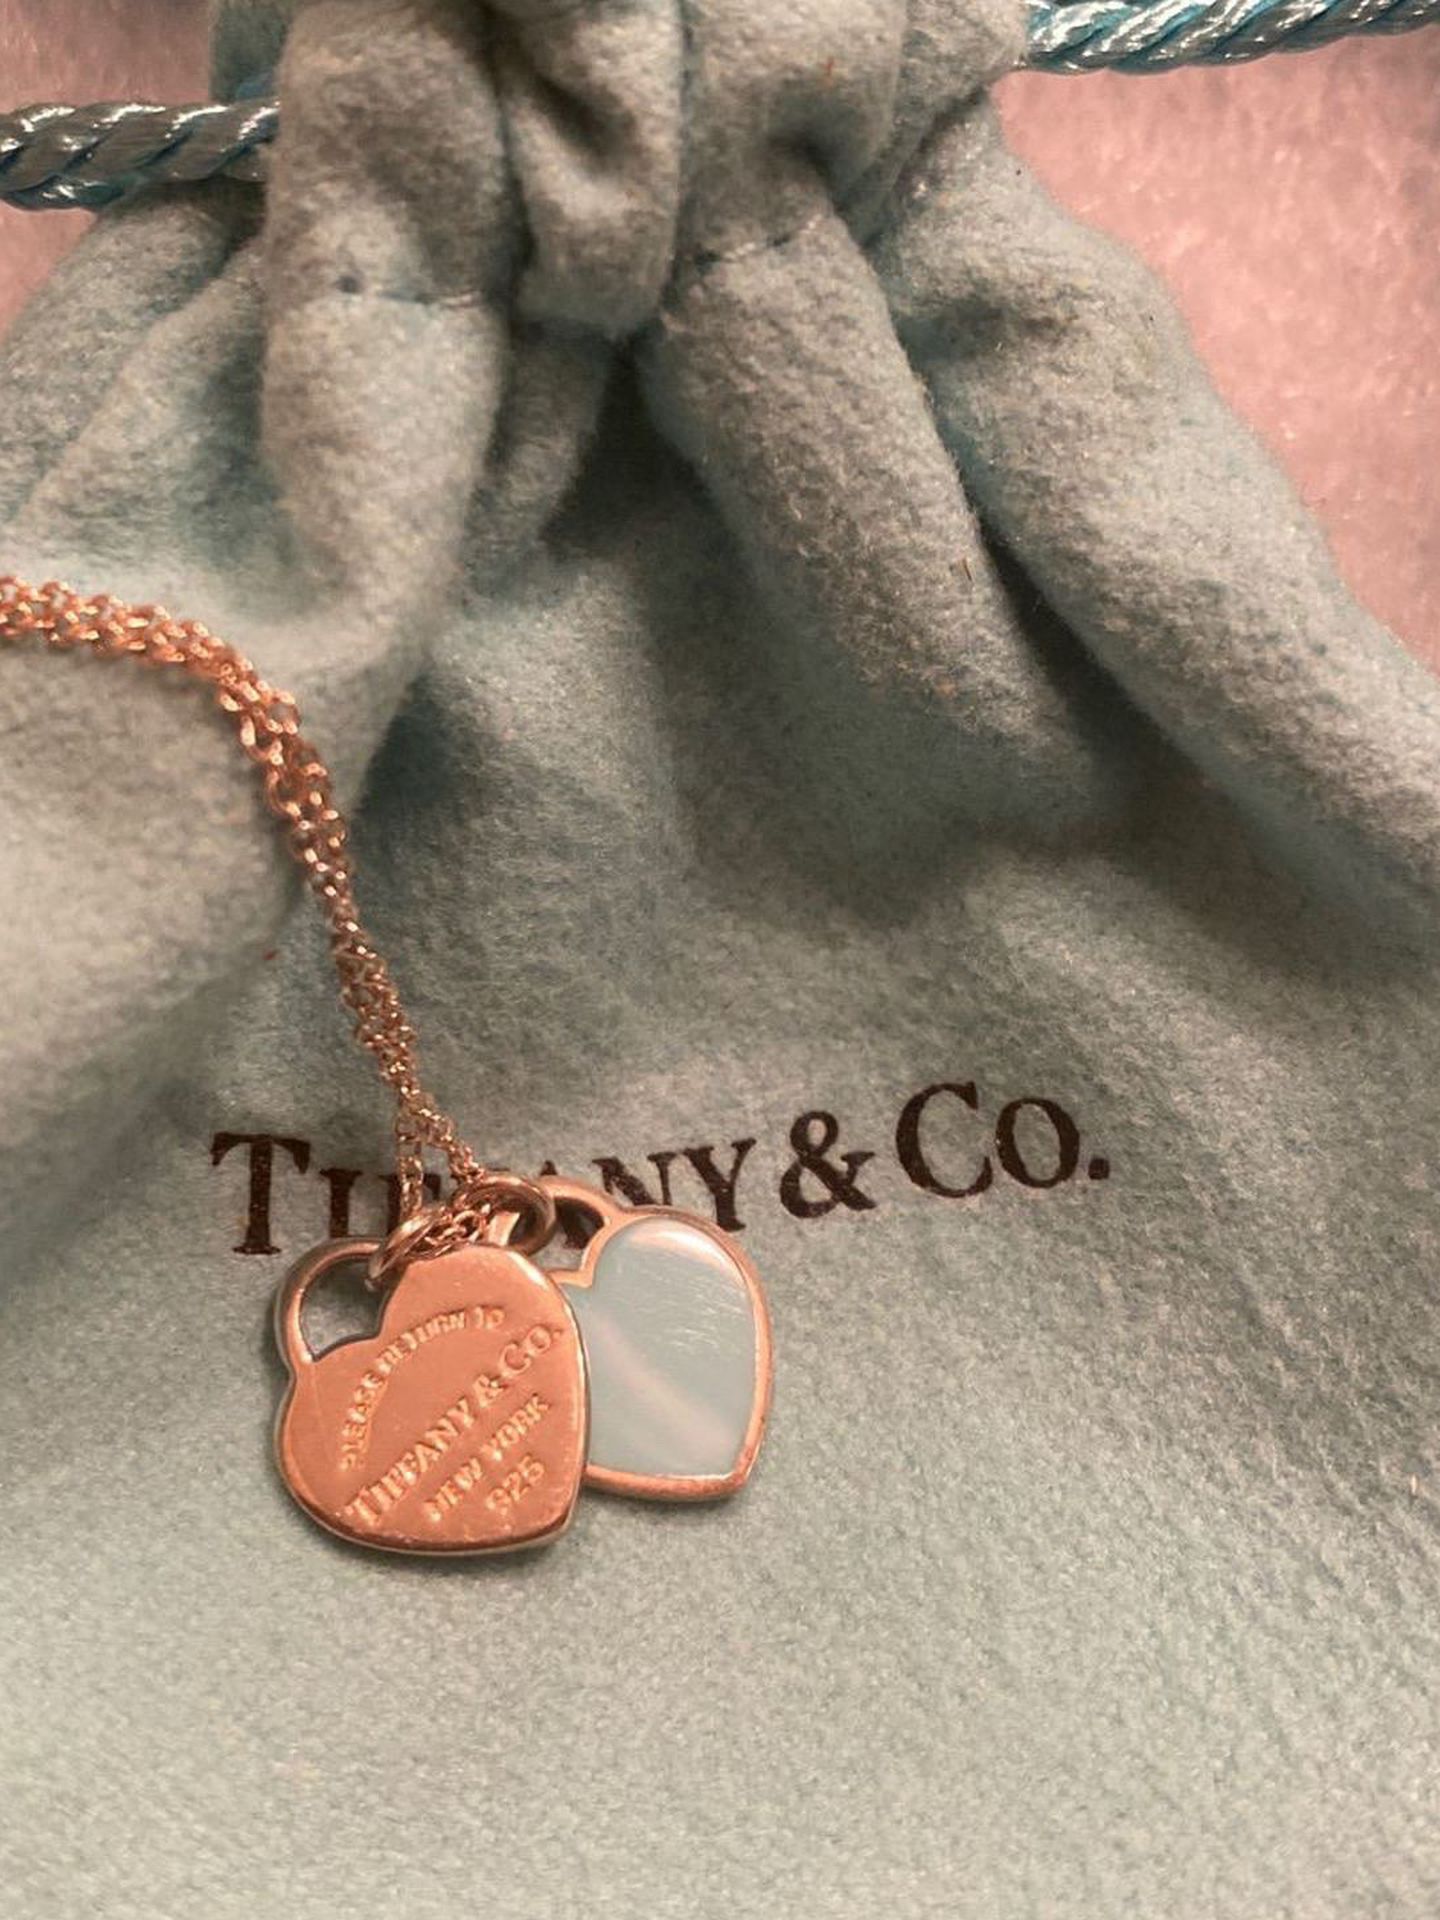 Authentic Tiffany & Co. necklace